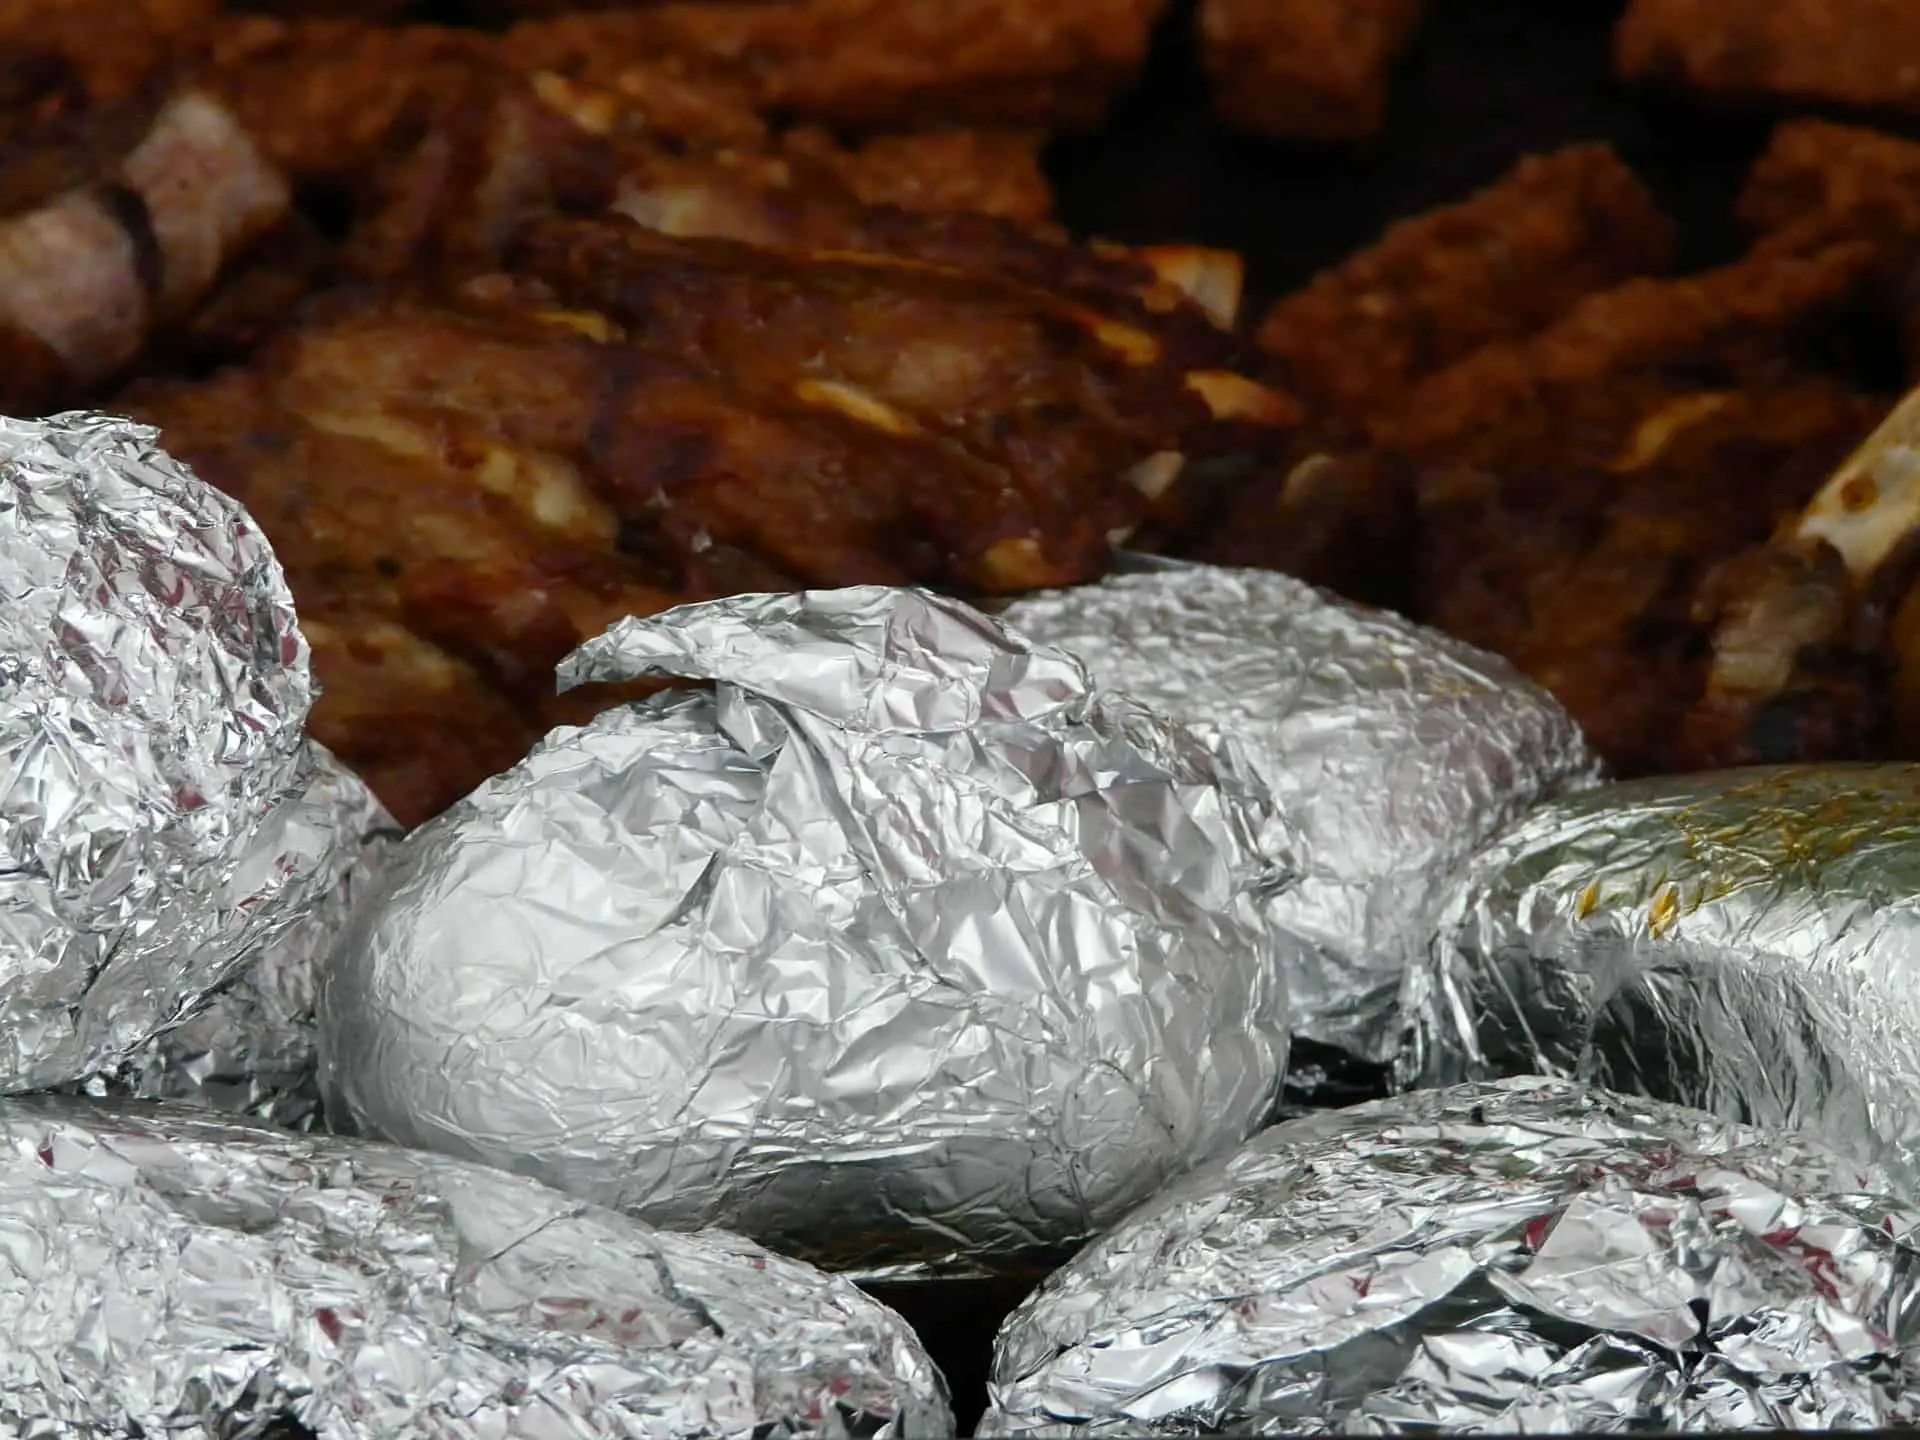 Baked Potatoes inside the oven and some are wrap with aluminum foil